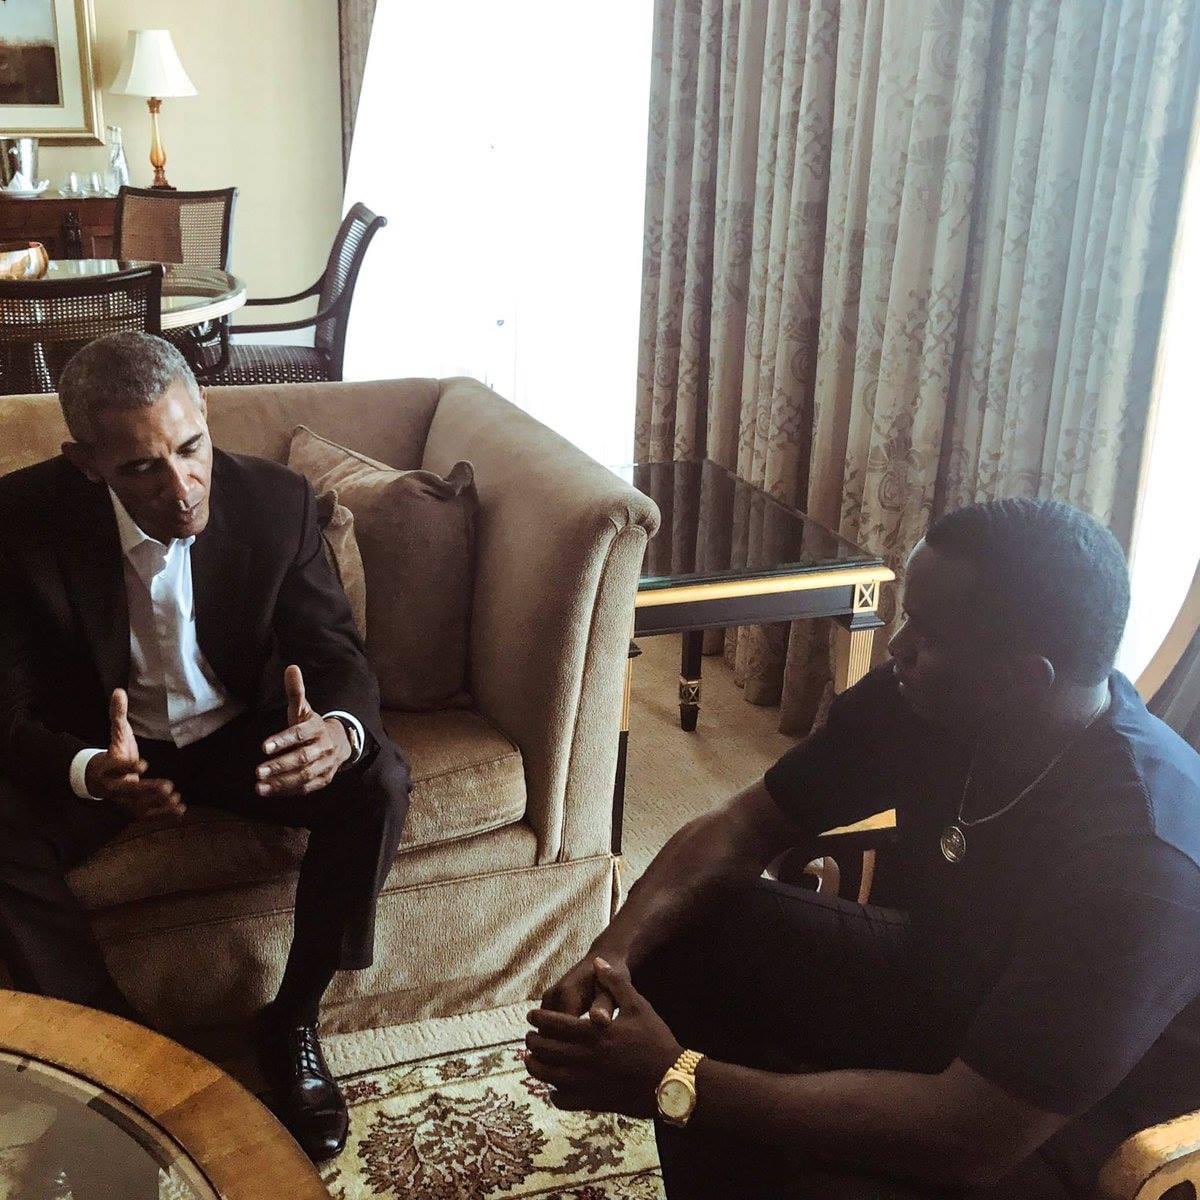 What do you think Obama is telling Diddy in this picture?